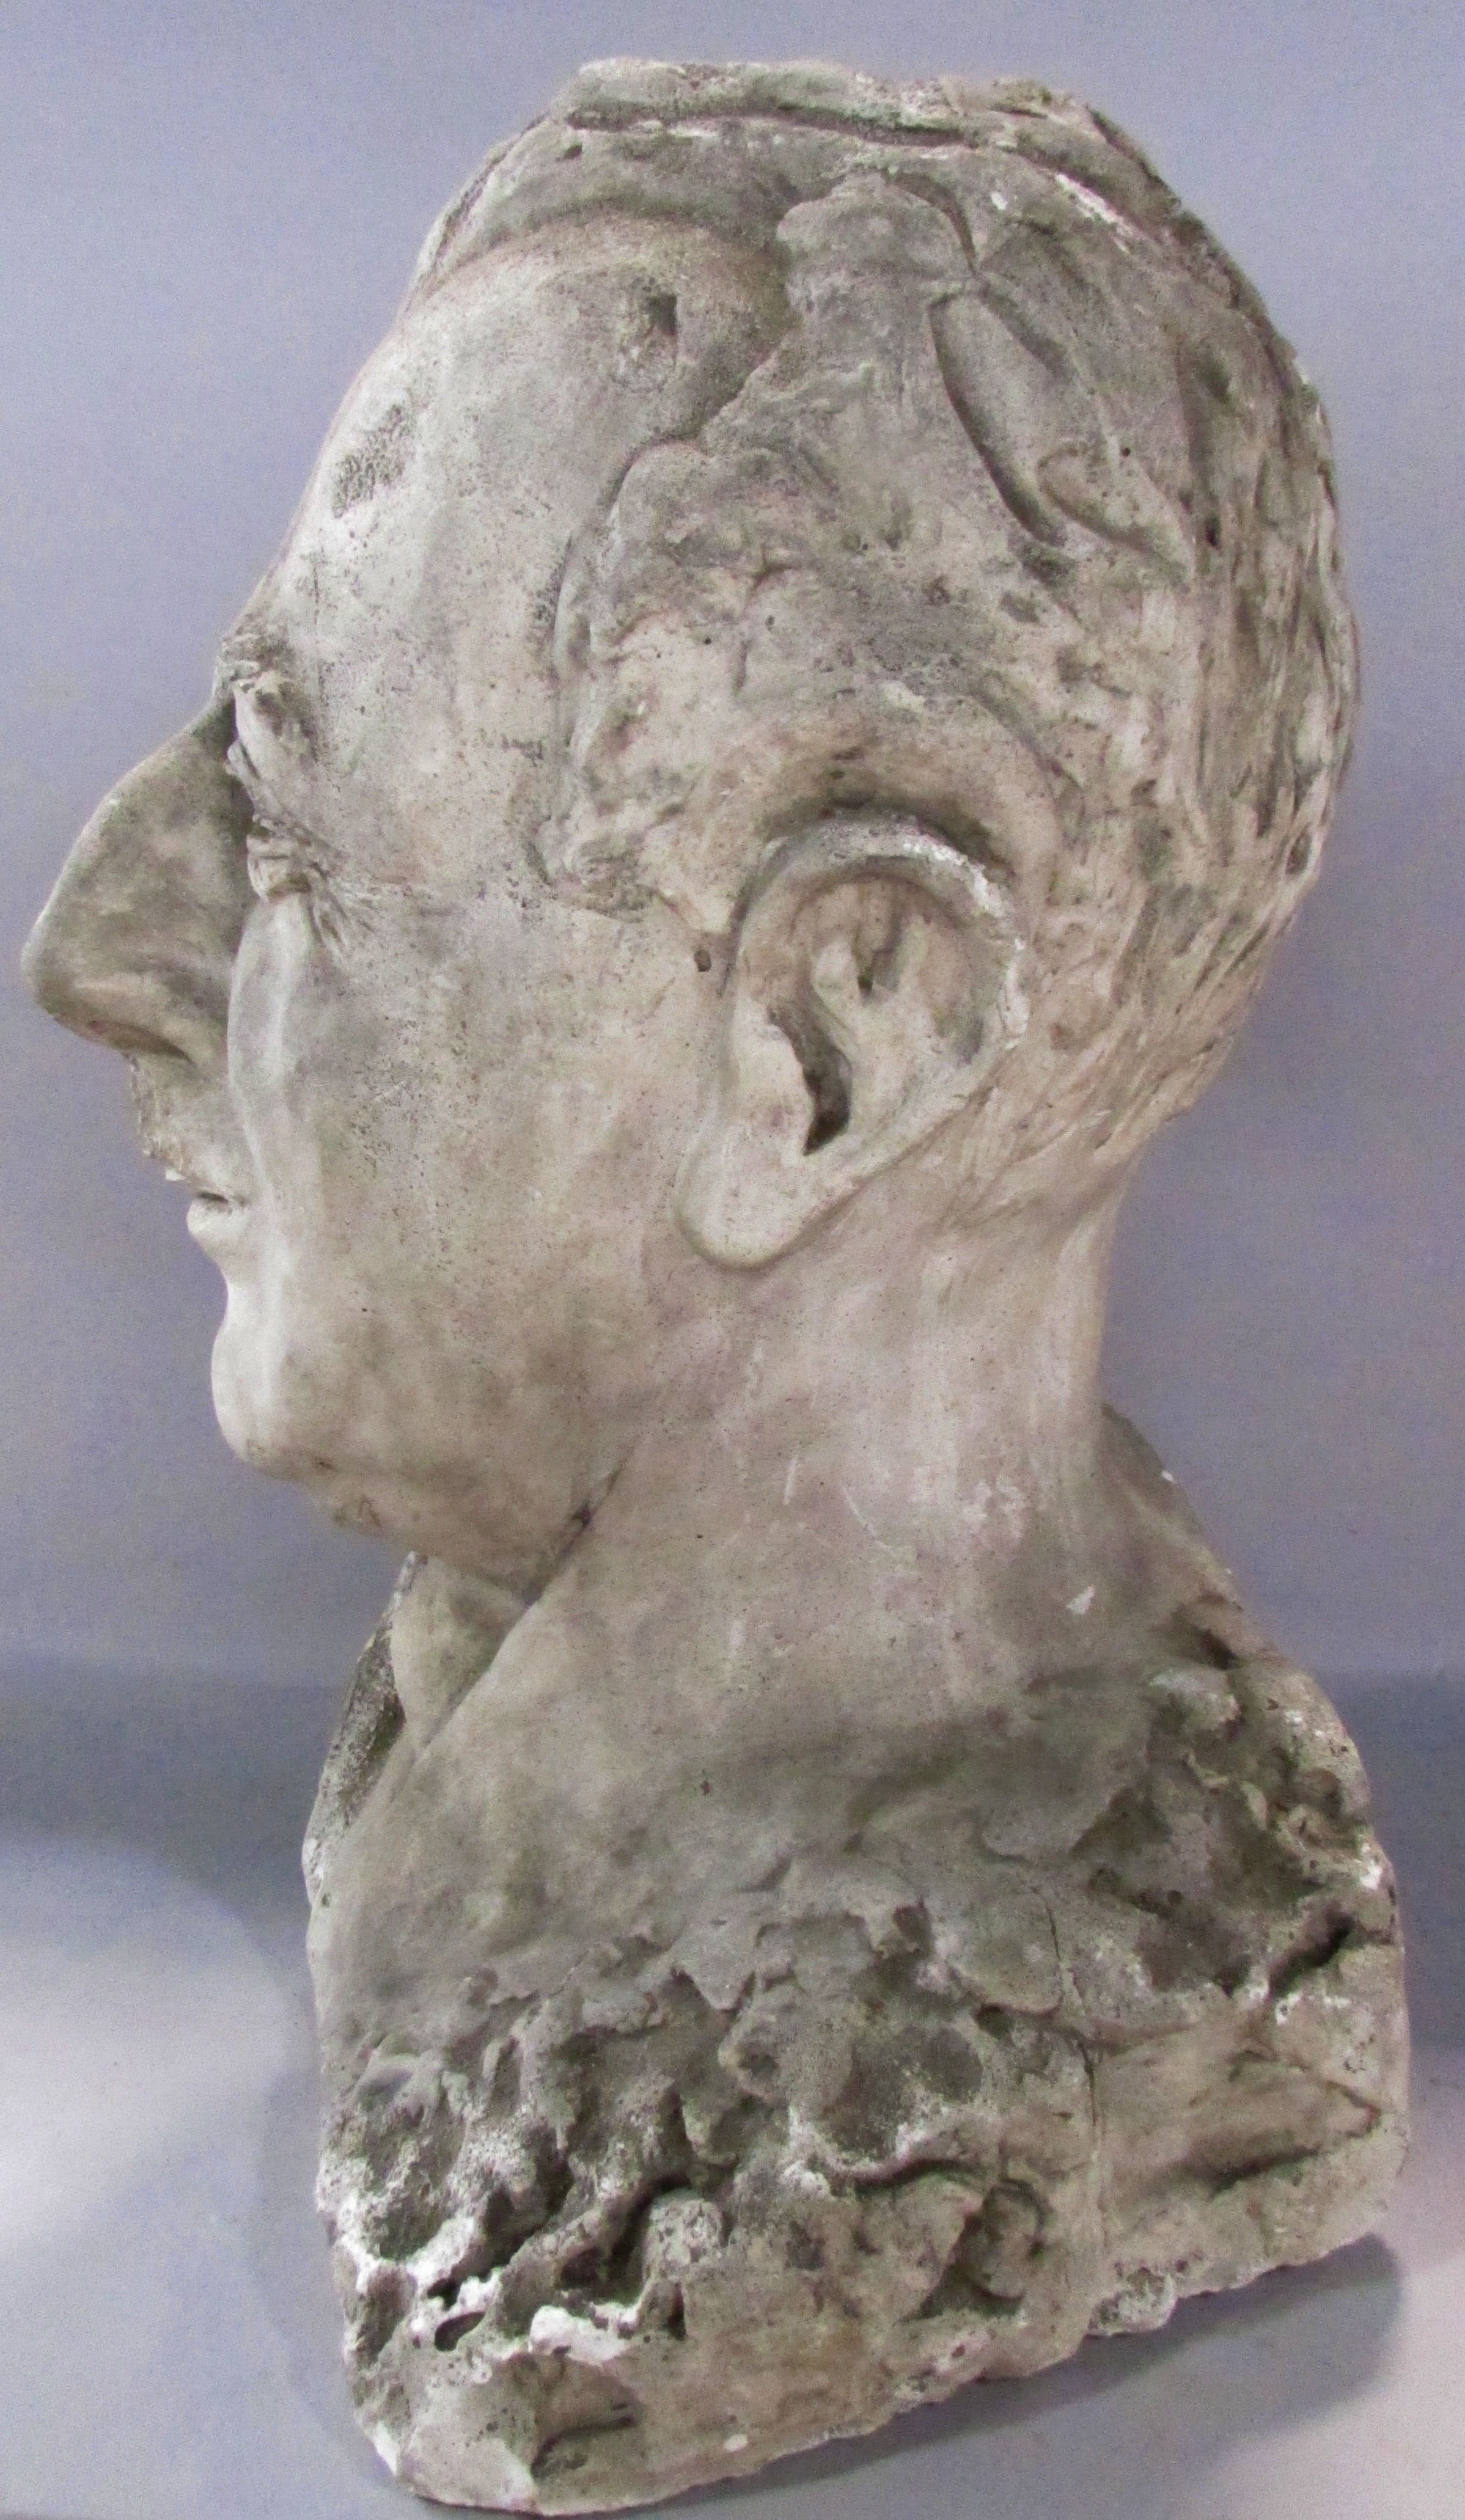 A plaster bust of a man with a Roman nose 40cm high. - Image 2 of 4